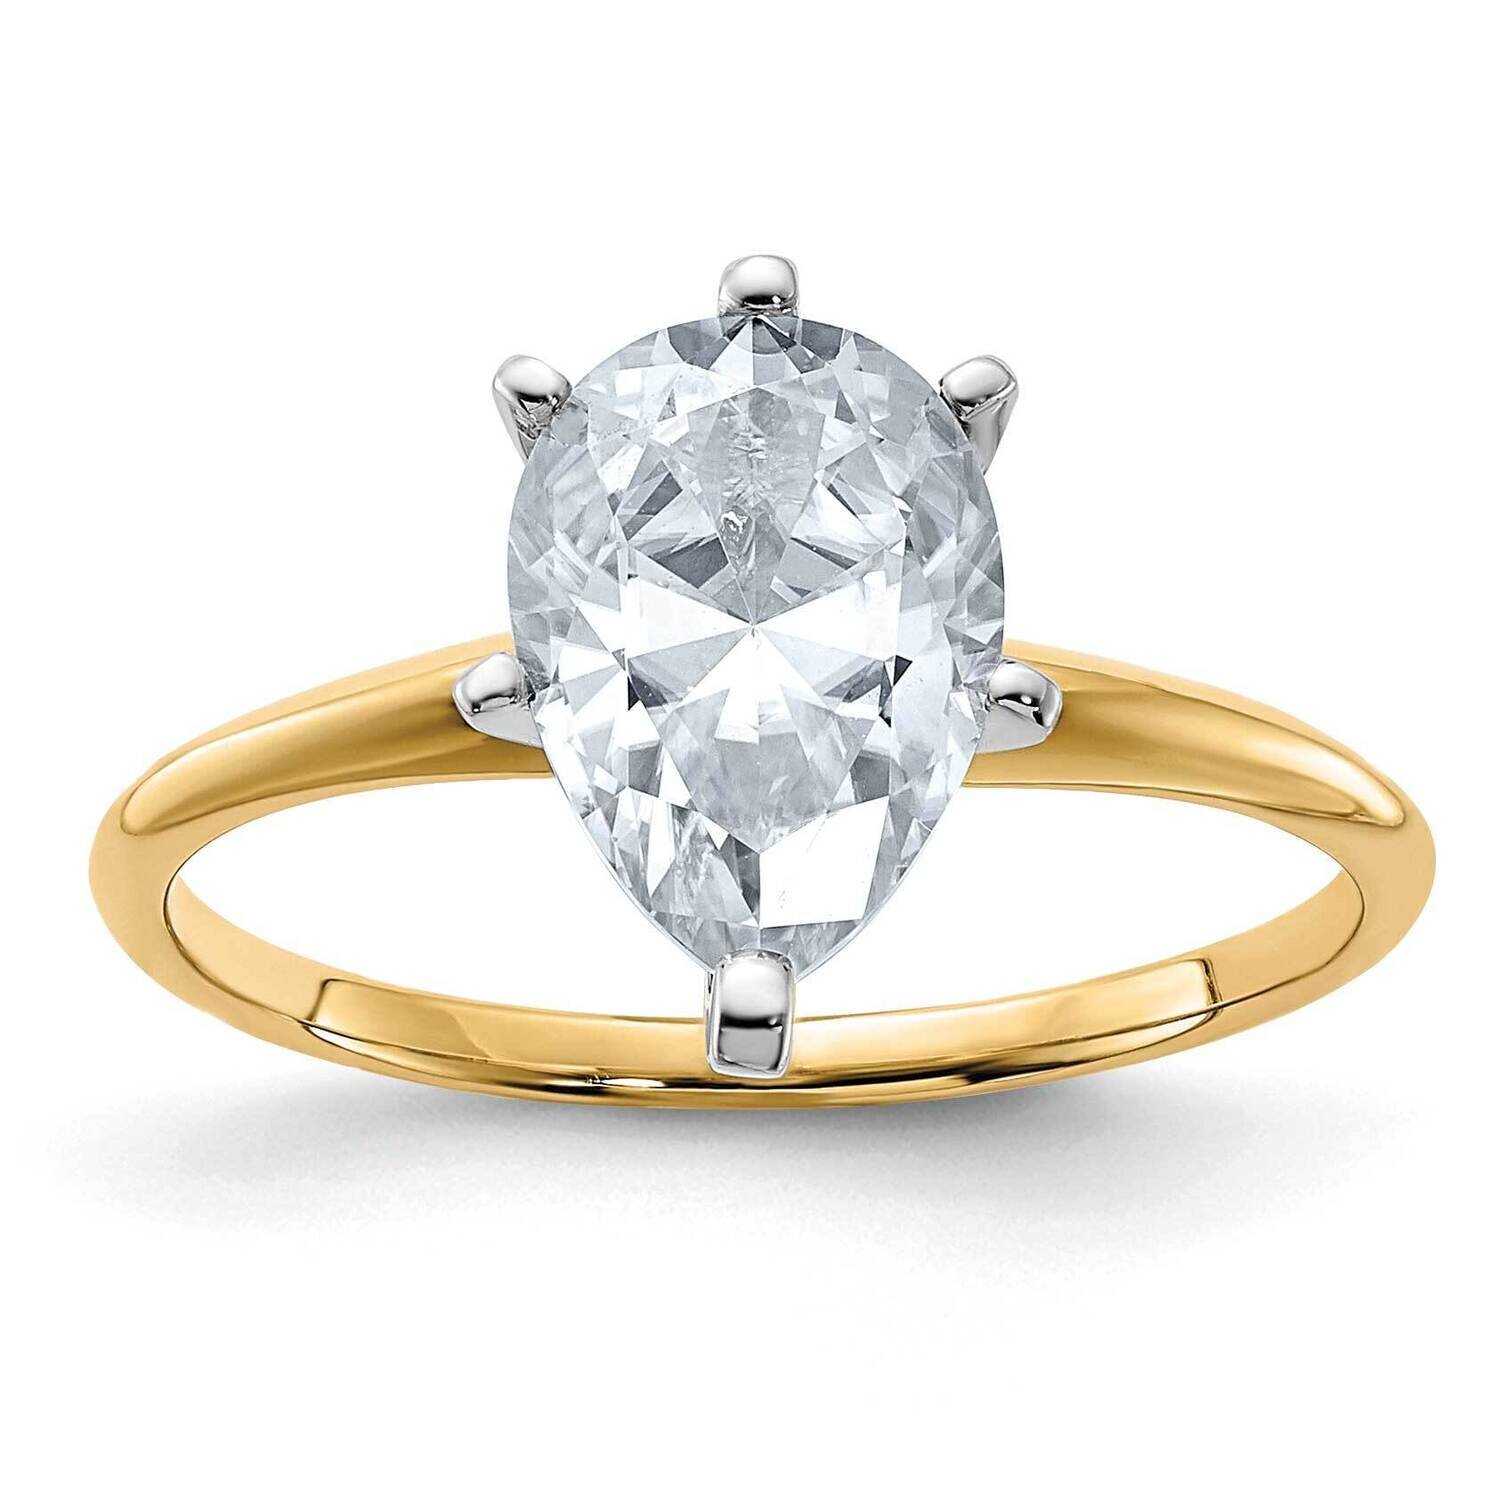 2ct. D E F Pure Light Pear Moissanite Solitaire Ring 14k Gold YGSH15A-15MP-5